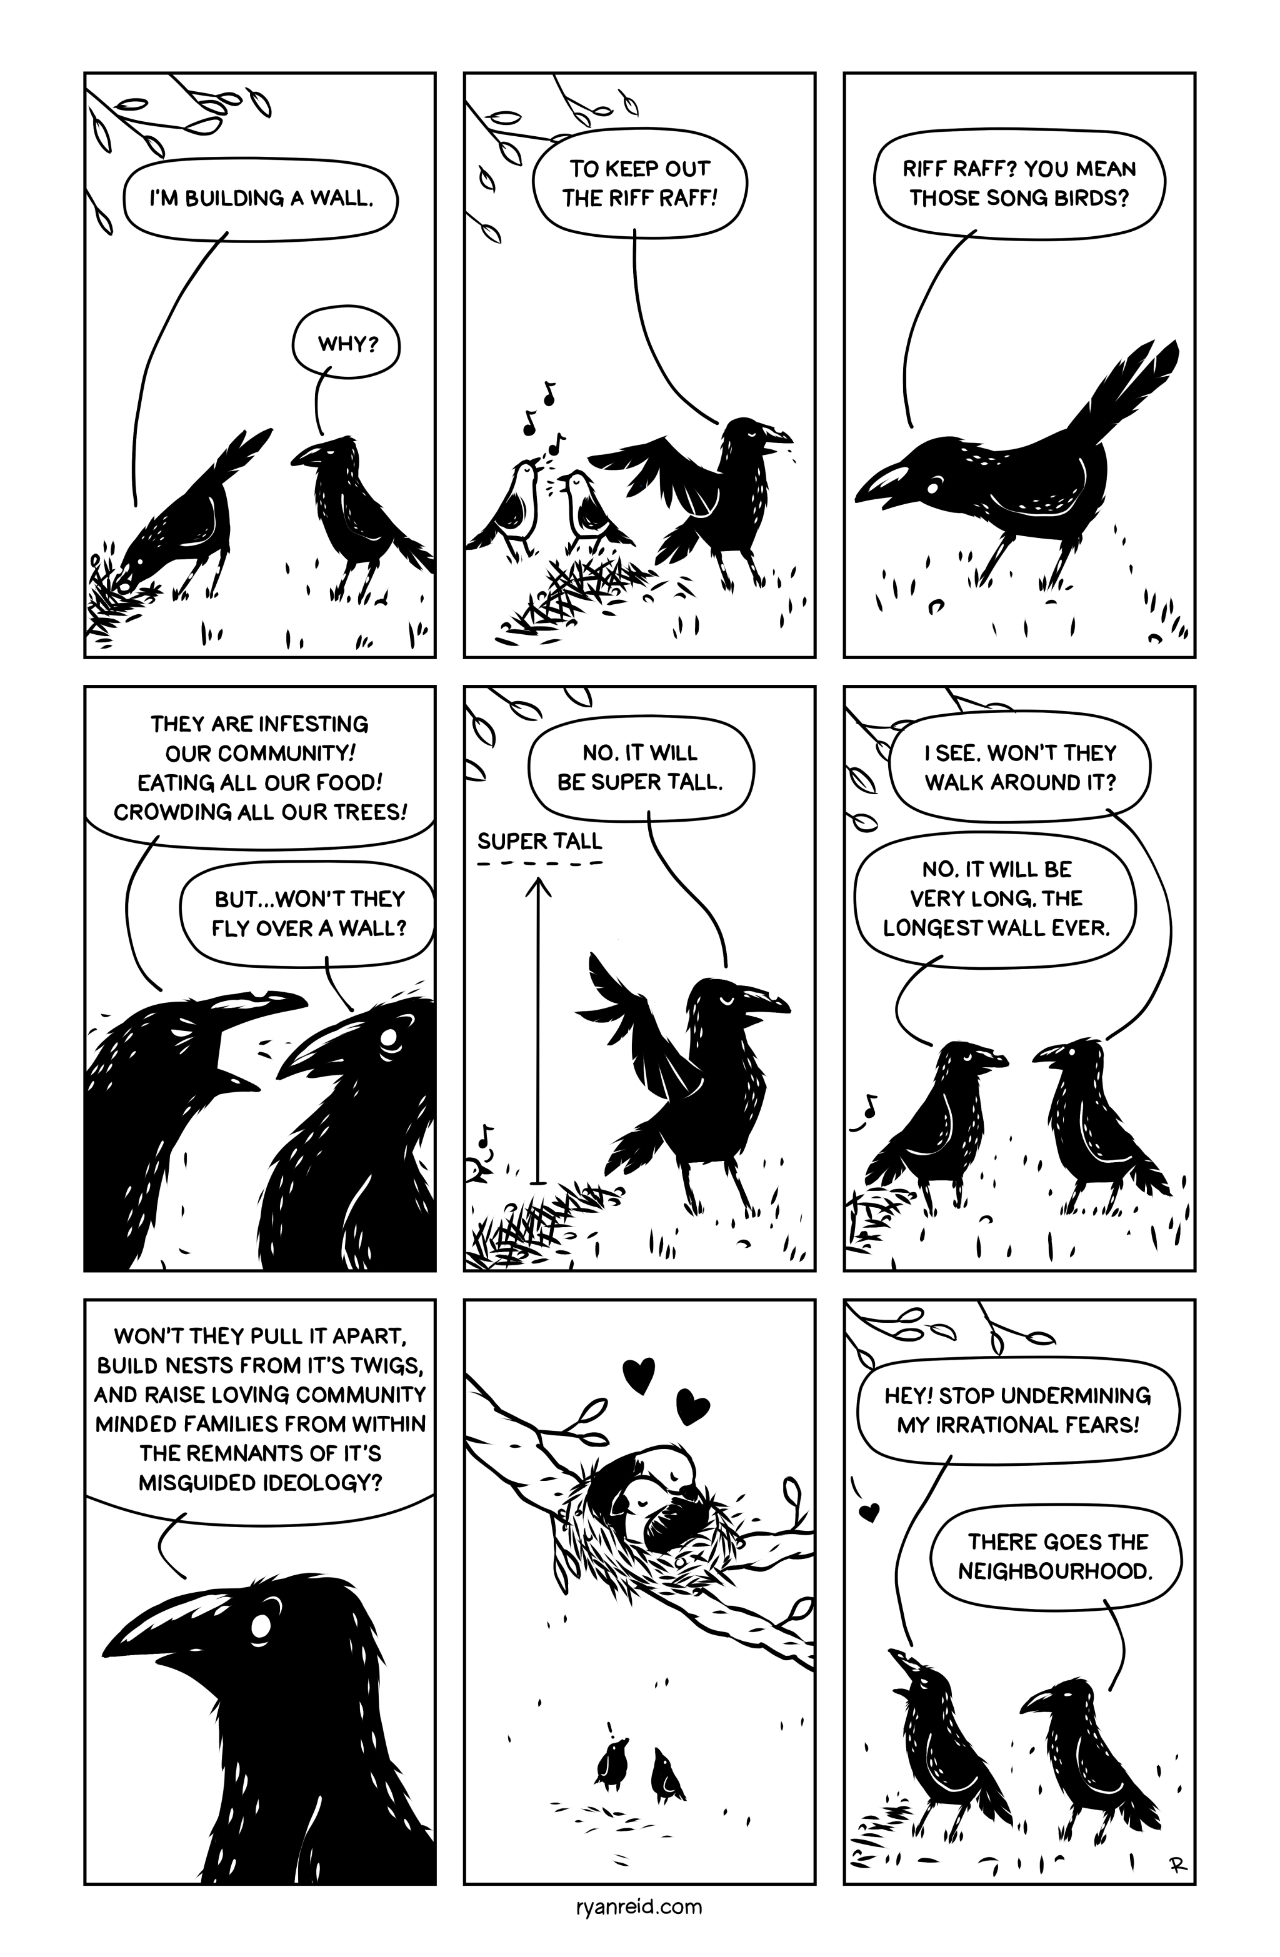 In this comic, the crows debate the pros and cons of building a wall to keep the song birds out.